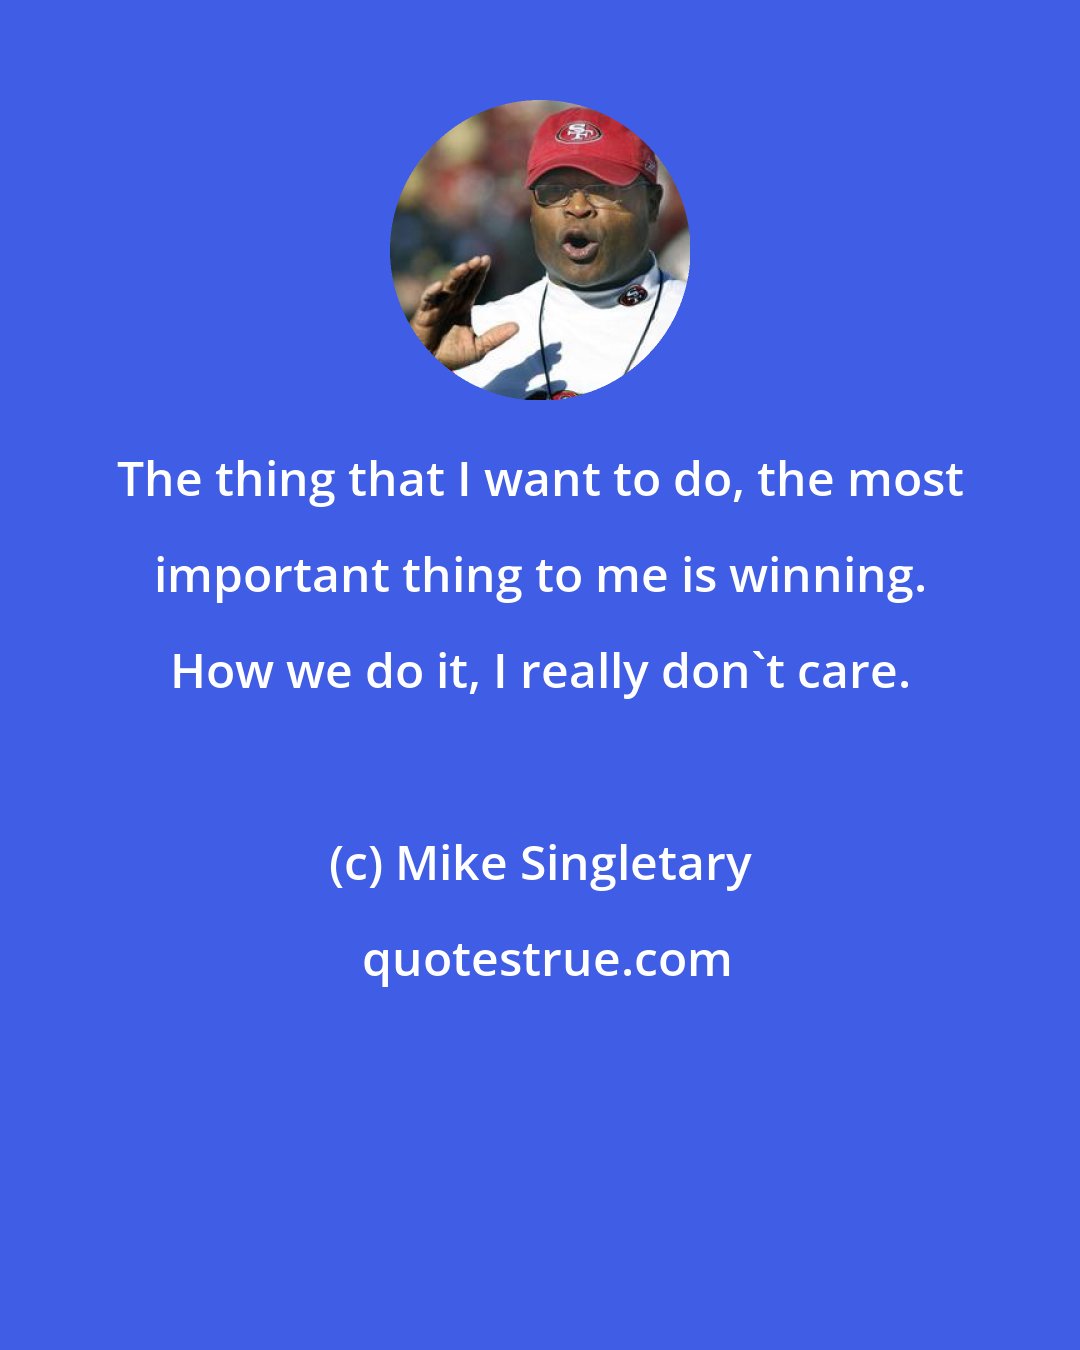 Mike Singletary: The thing that I want to do, the most important thing to me is winning. How we do it, I really don't care.